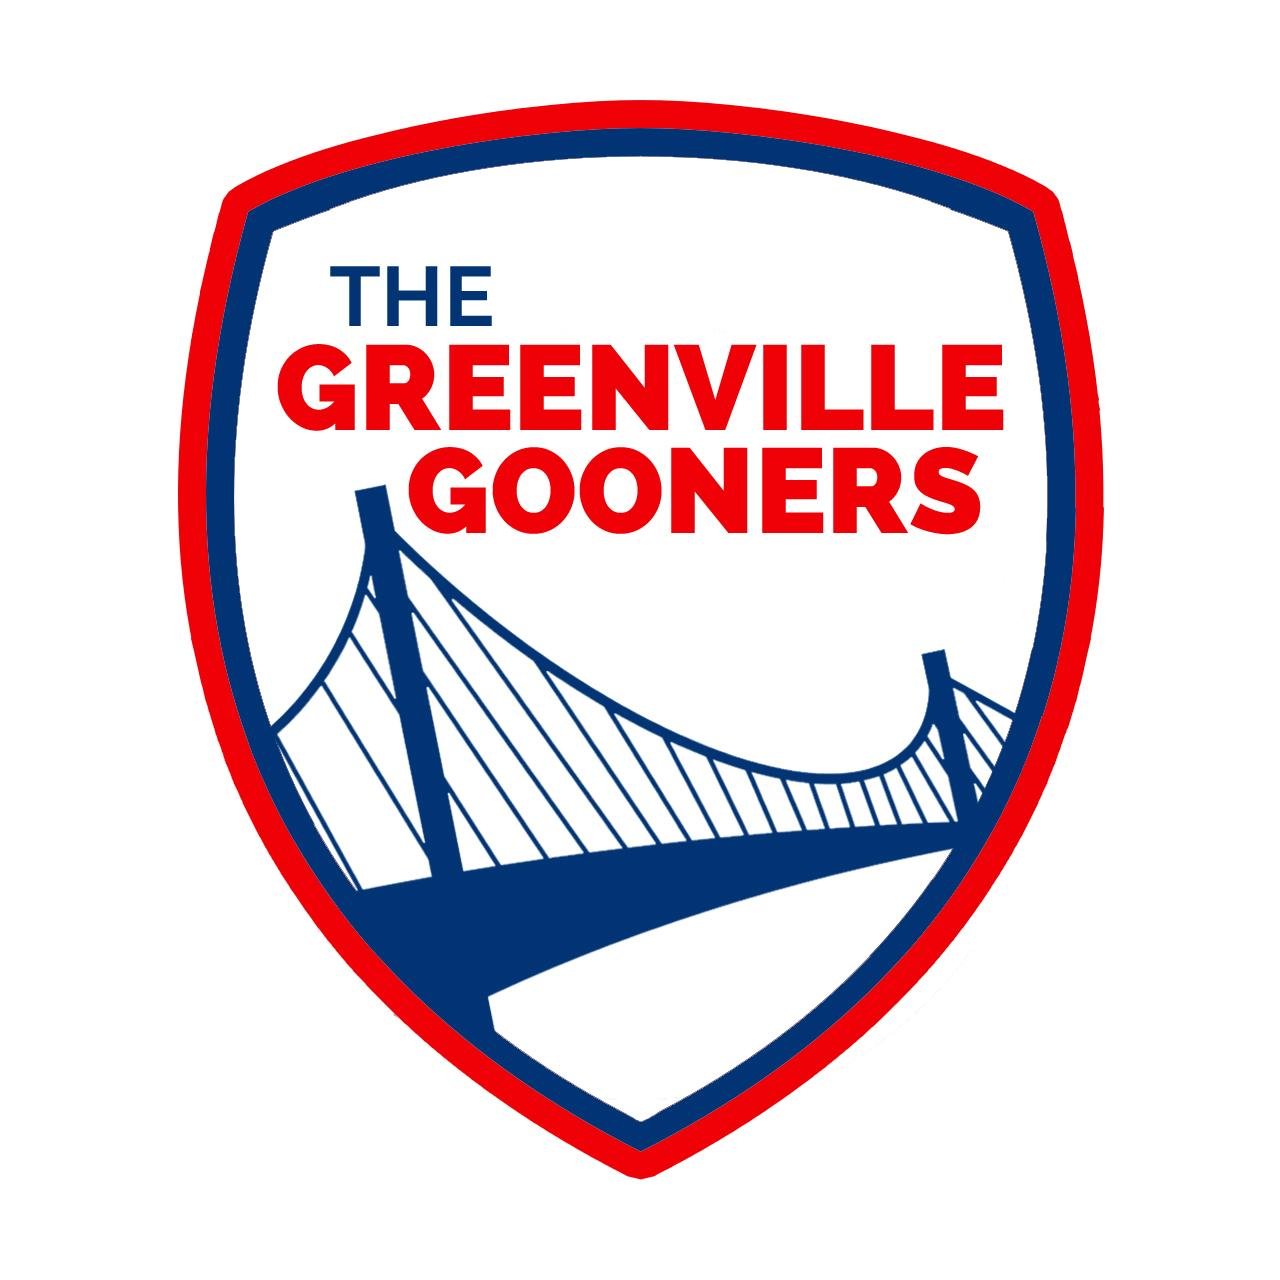 The Official #Arsenal Supporters Group in #GreenvilleSC. We meet at Upstate Craft Beer Co. Like our Facebook Page to get Match and Event info!